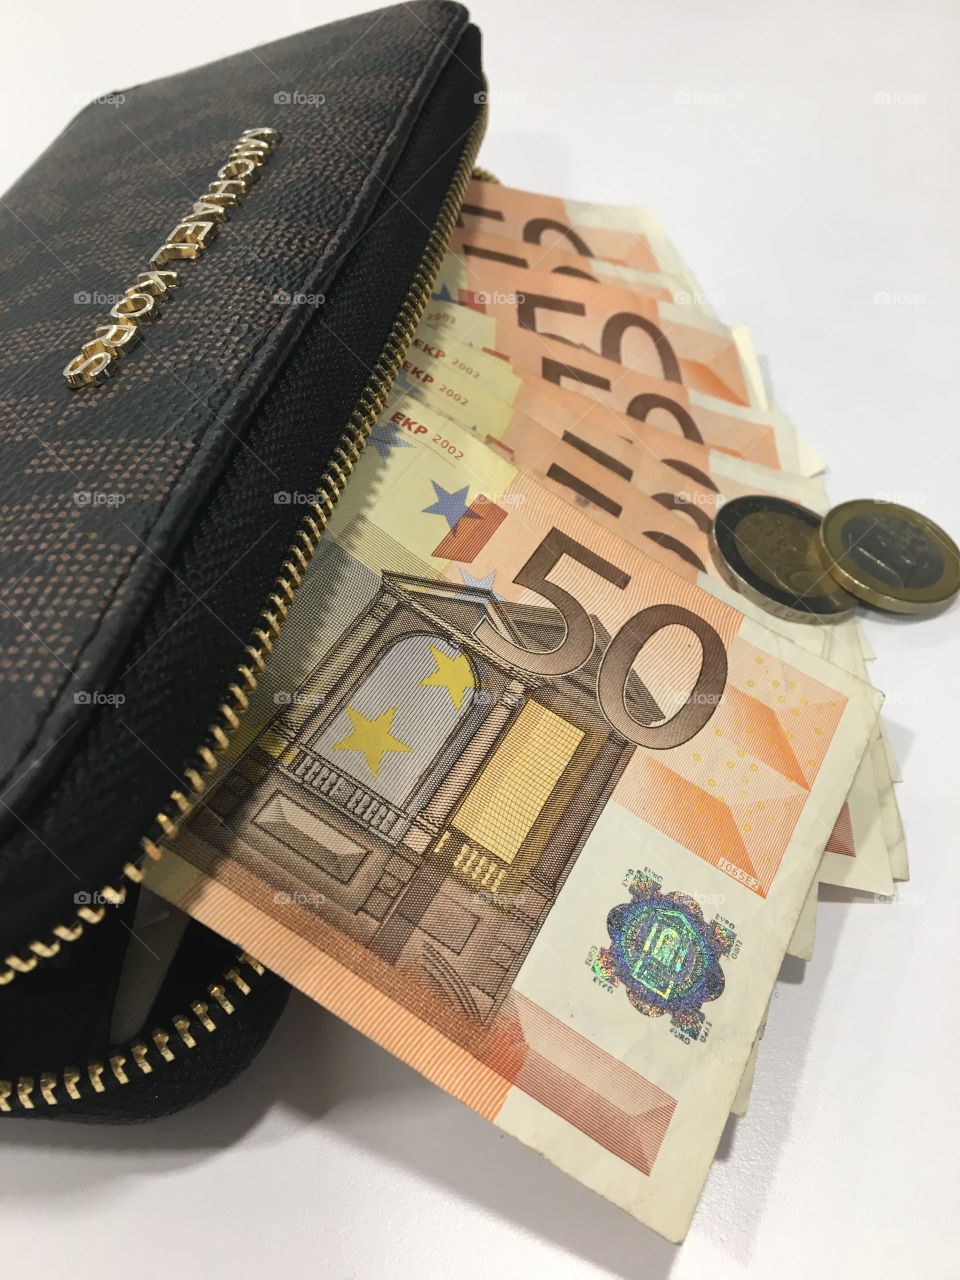 Wallet with euro cash